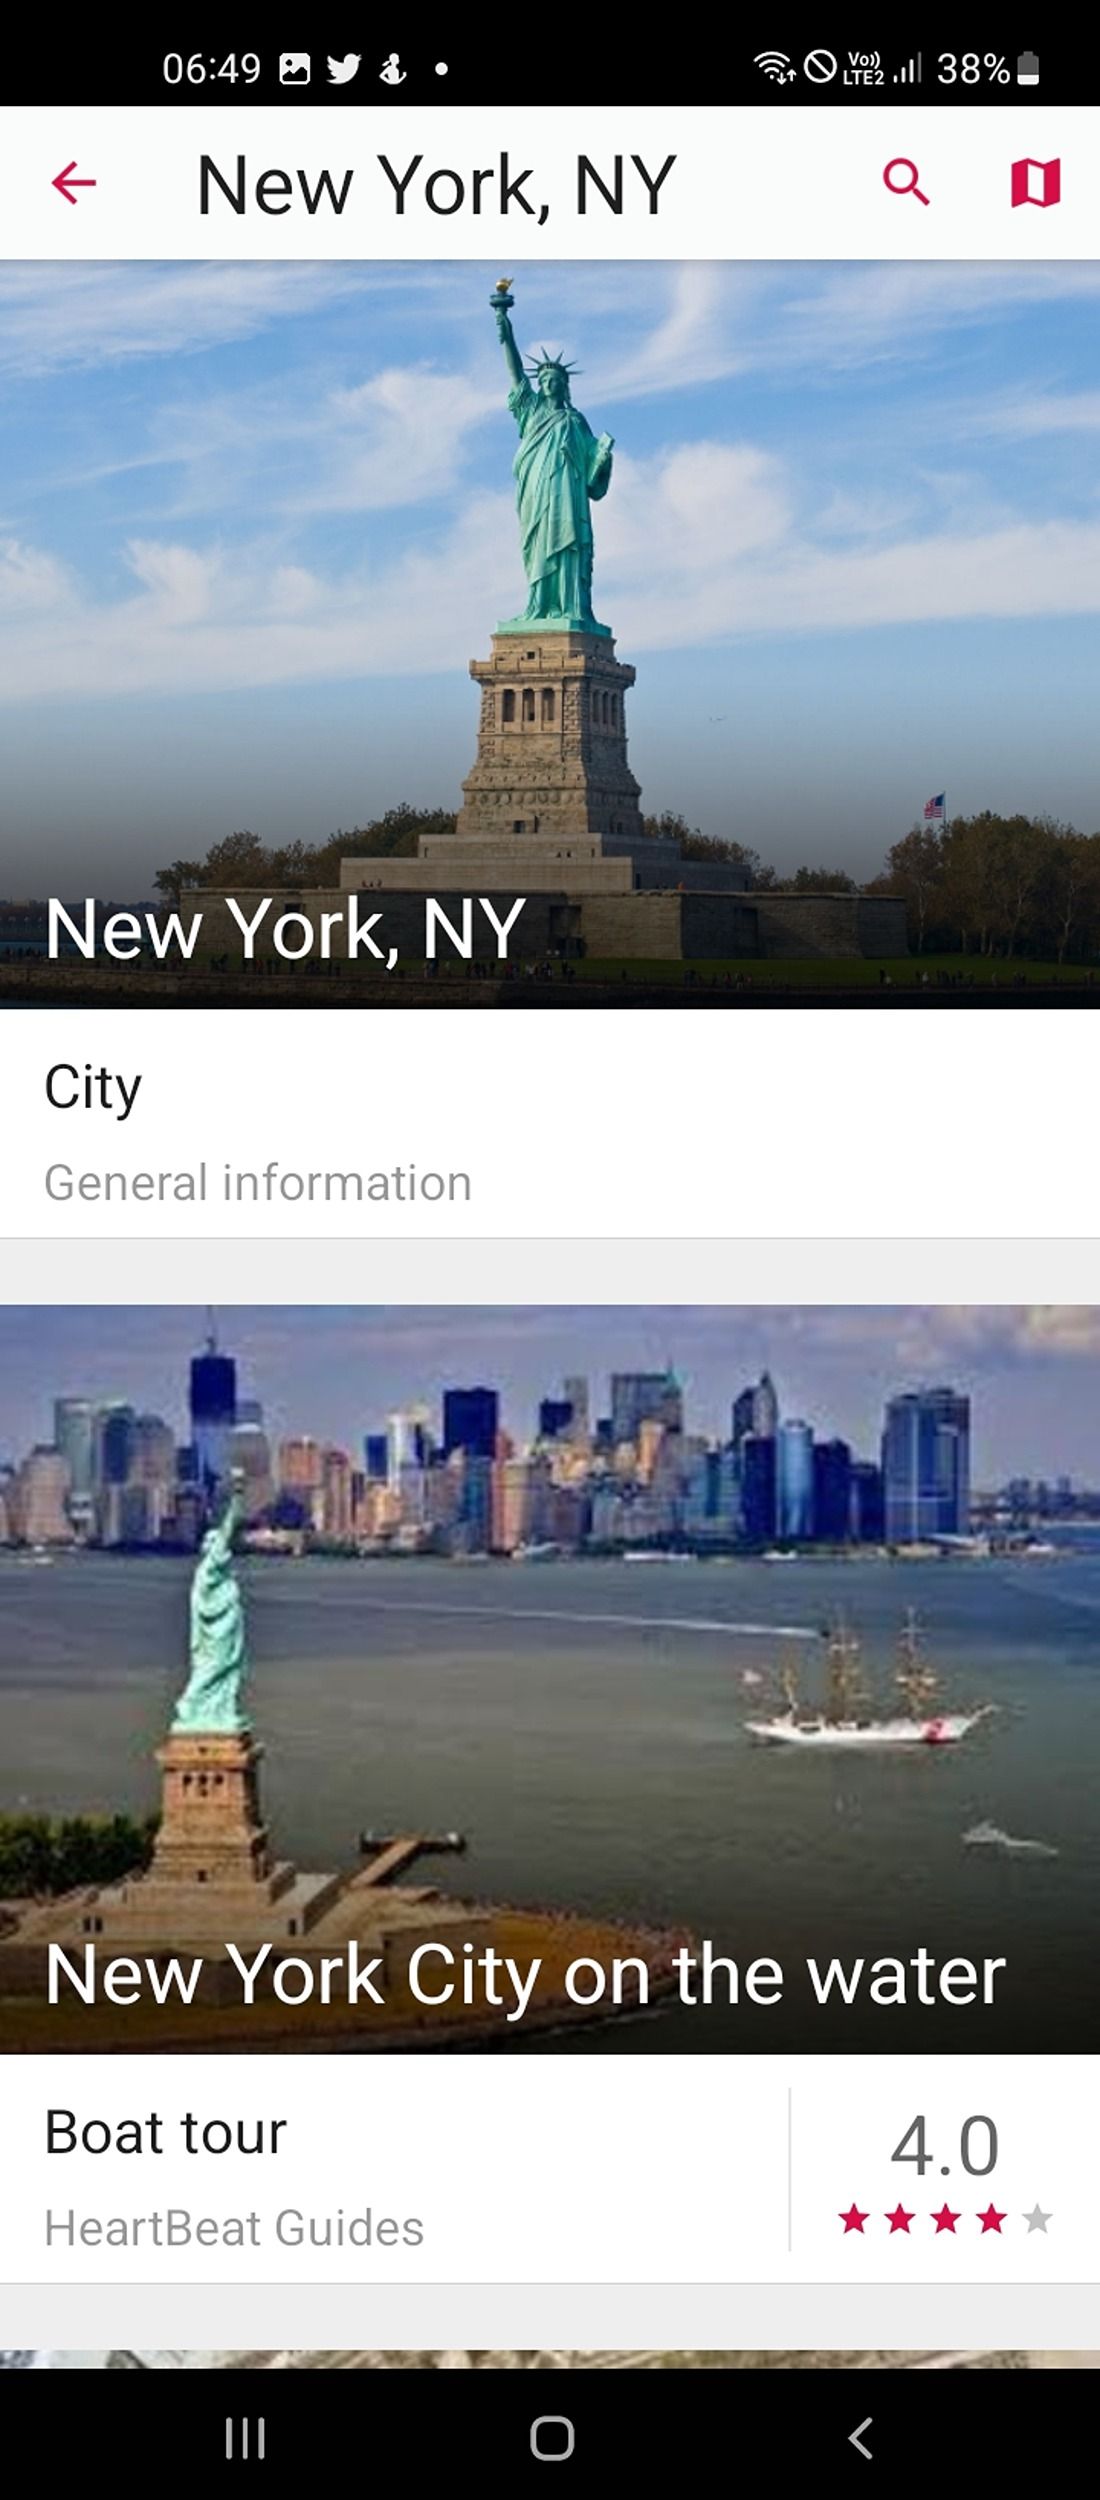 Audio sightseeing and city tours in IZI Travel app